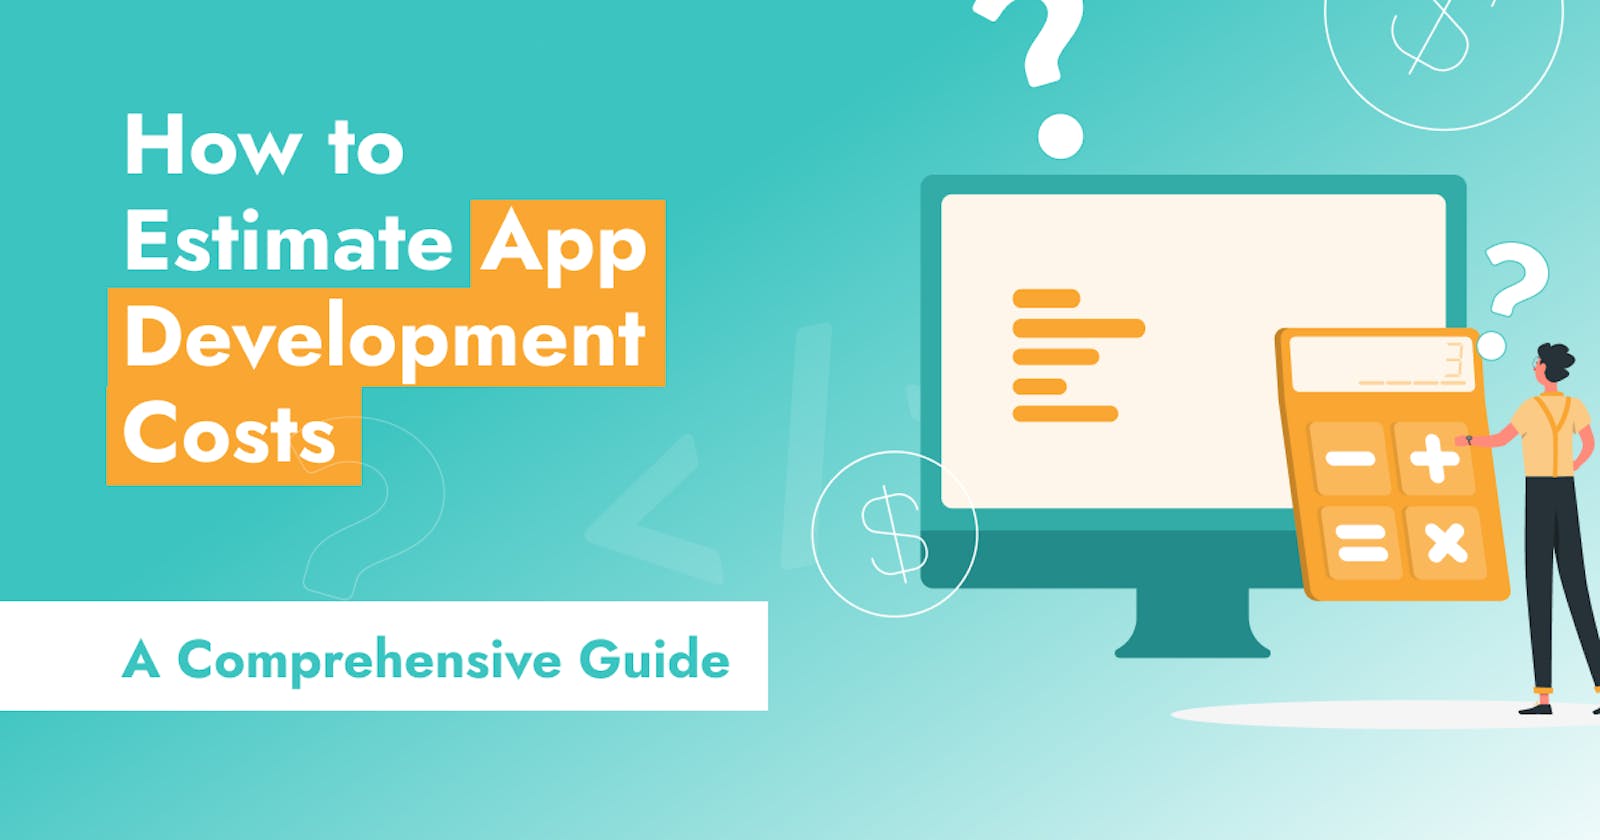 How to Estimate App Development Costs: A Comprehensive Guide